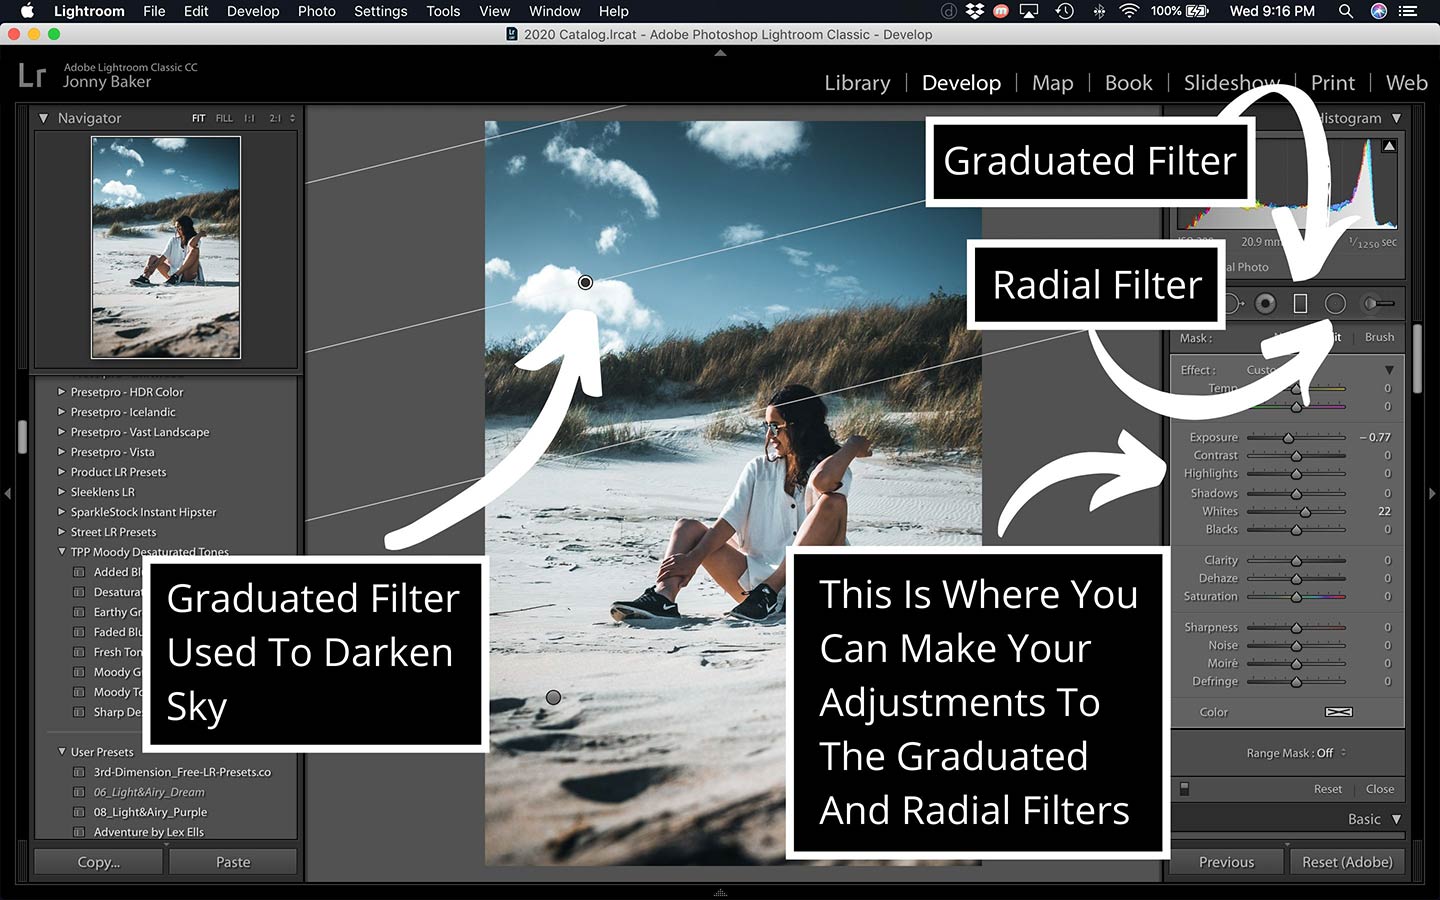 This printscreen from the desktop program shows how to add filters to your photos in addition to your presets a great little tip from this Lightroom presets guide.